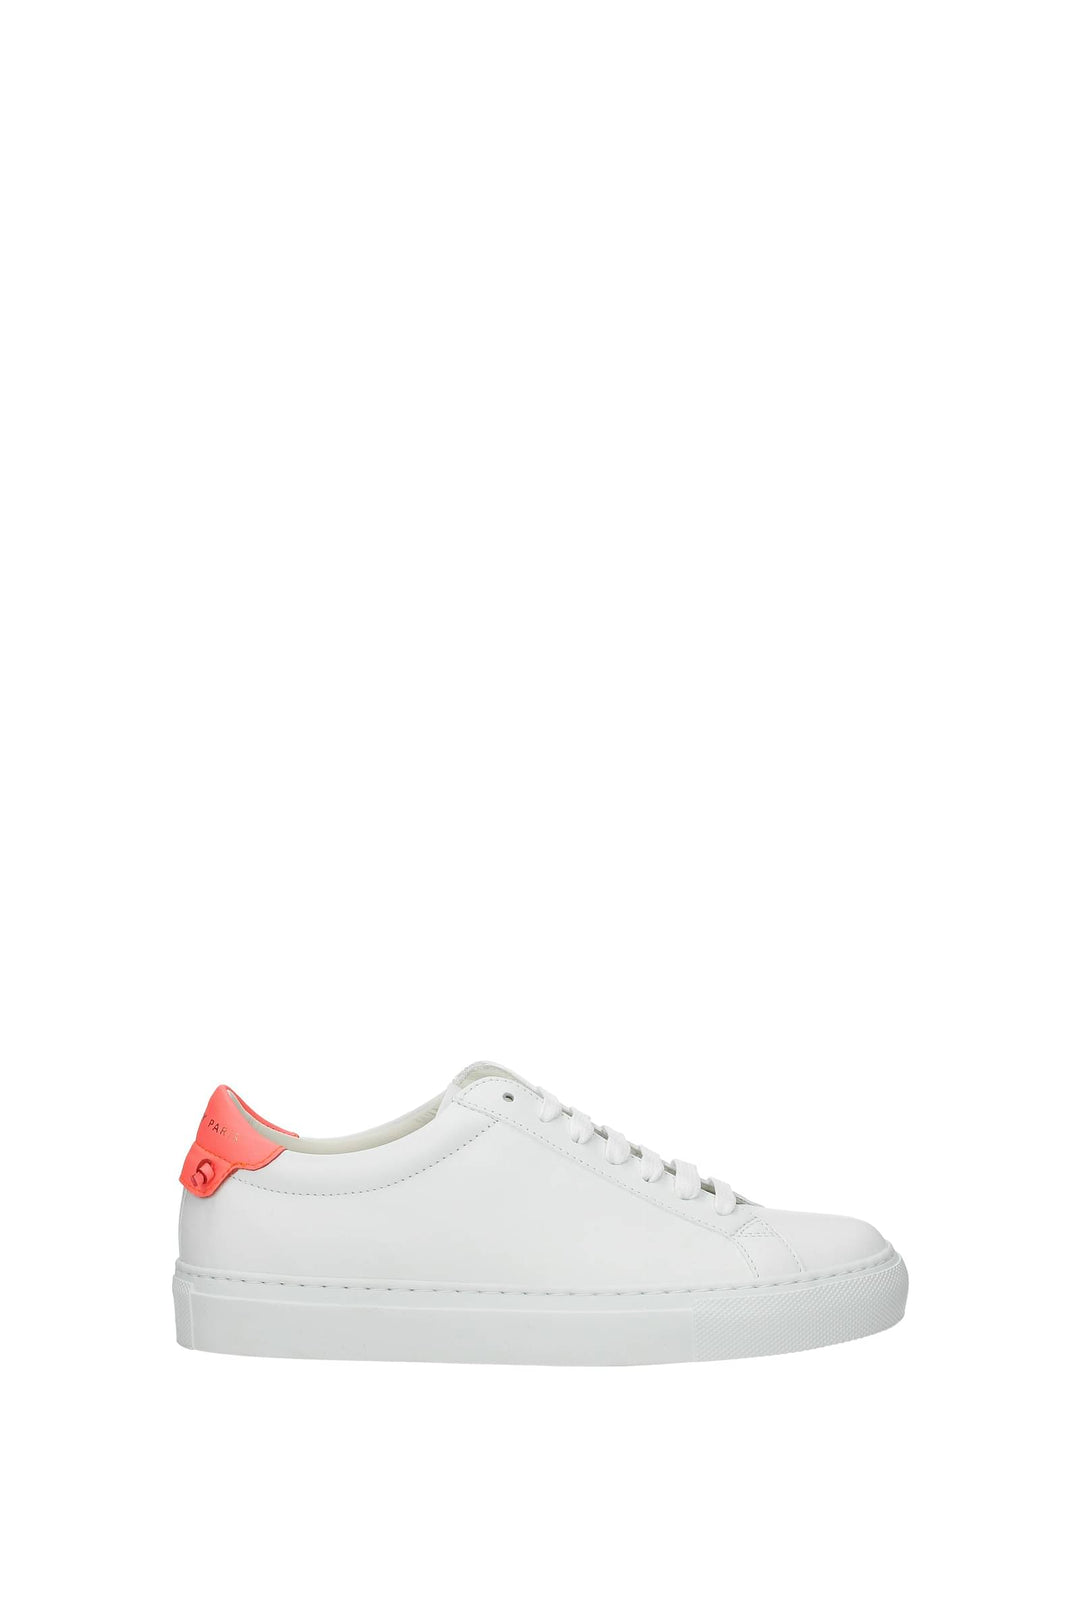 Sneakers Urban Street Pelle Bianco Rosa Neon - Givenchy - Donna